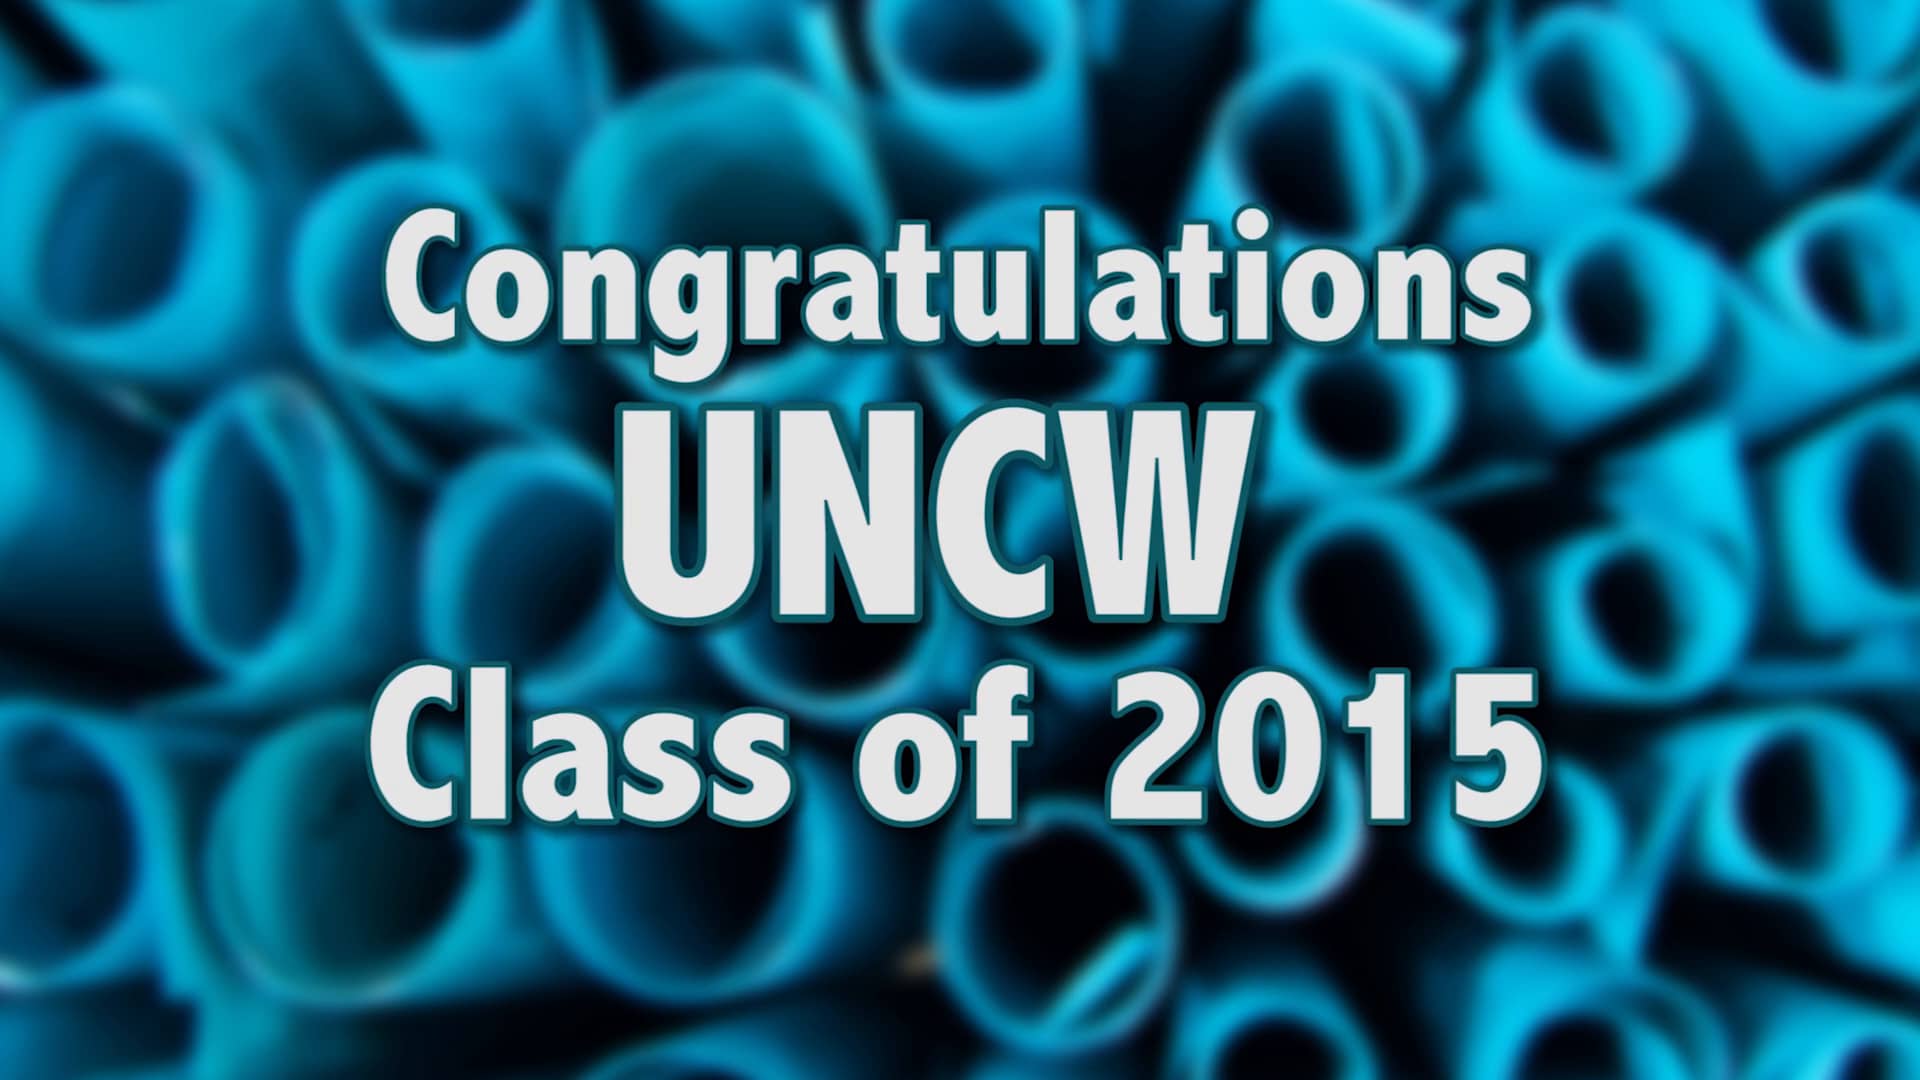 2015 UNCW Spring Commencement Highlight Video on Vimeo